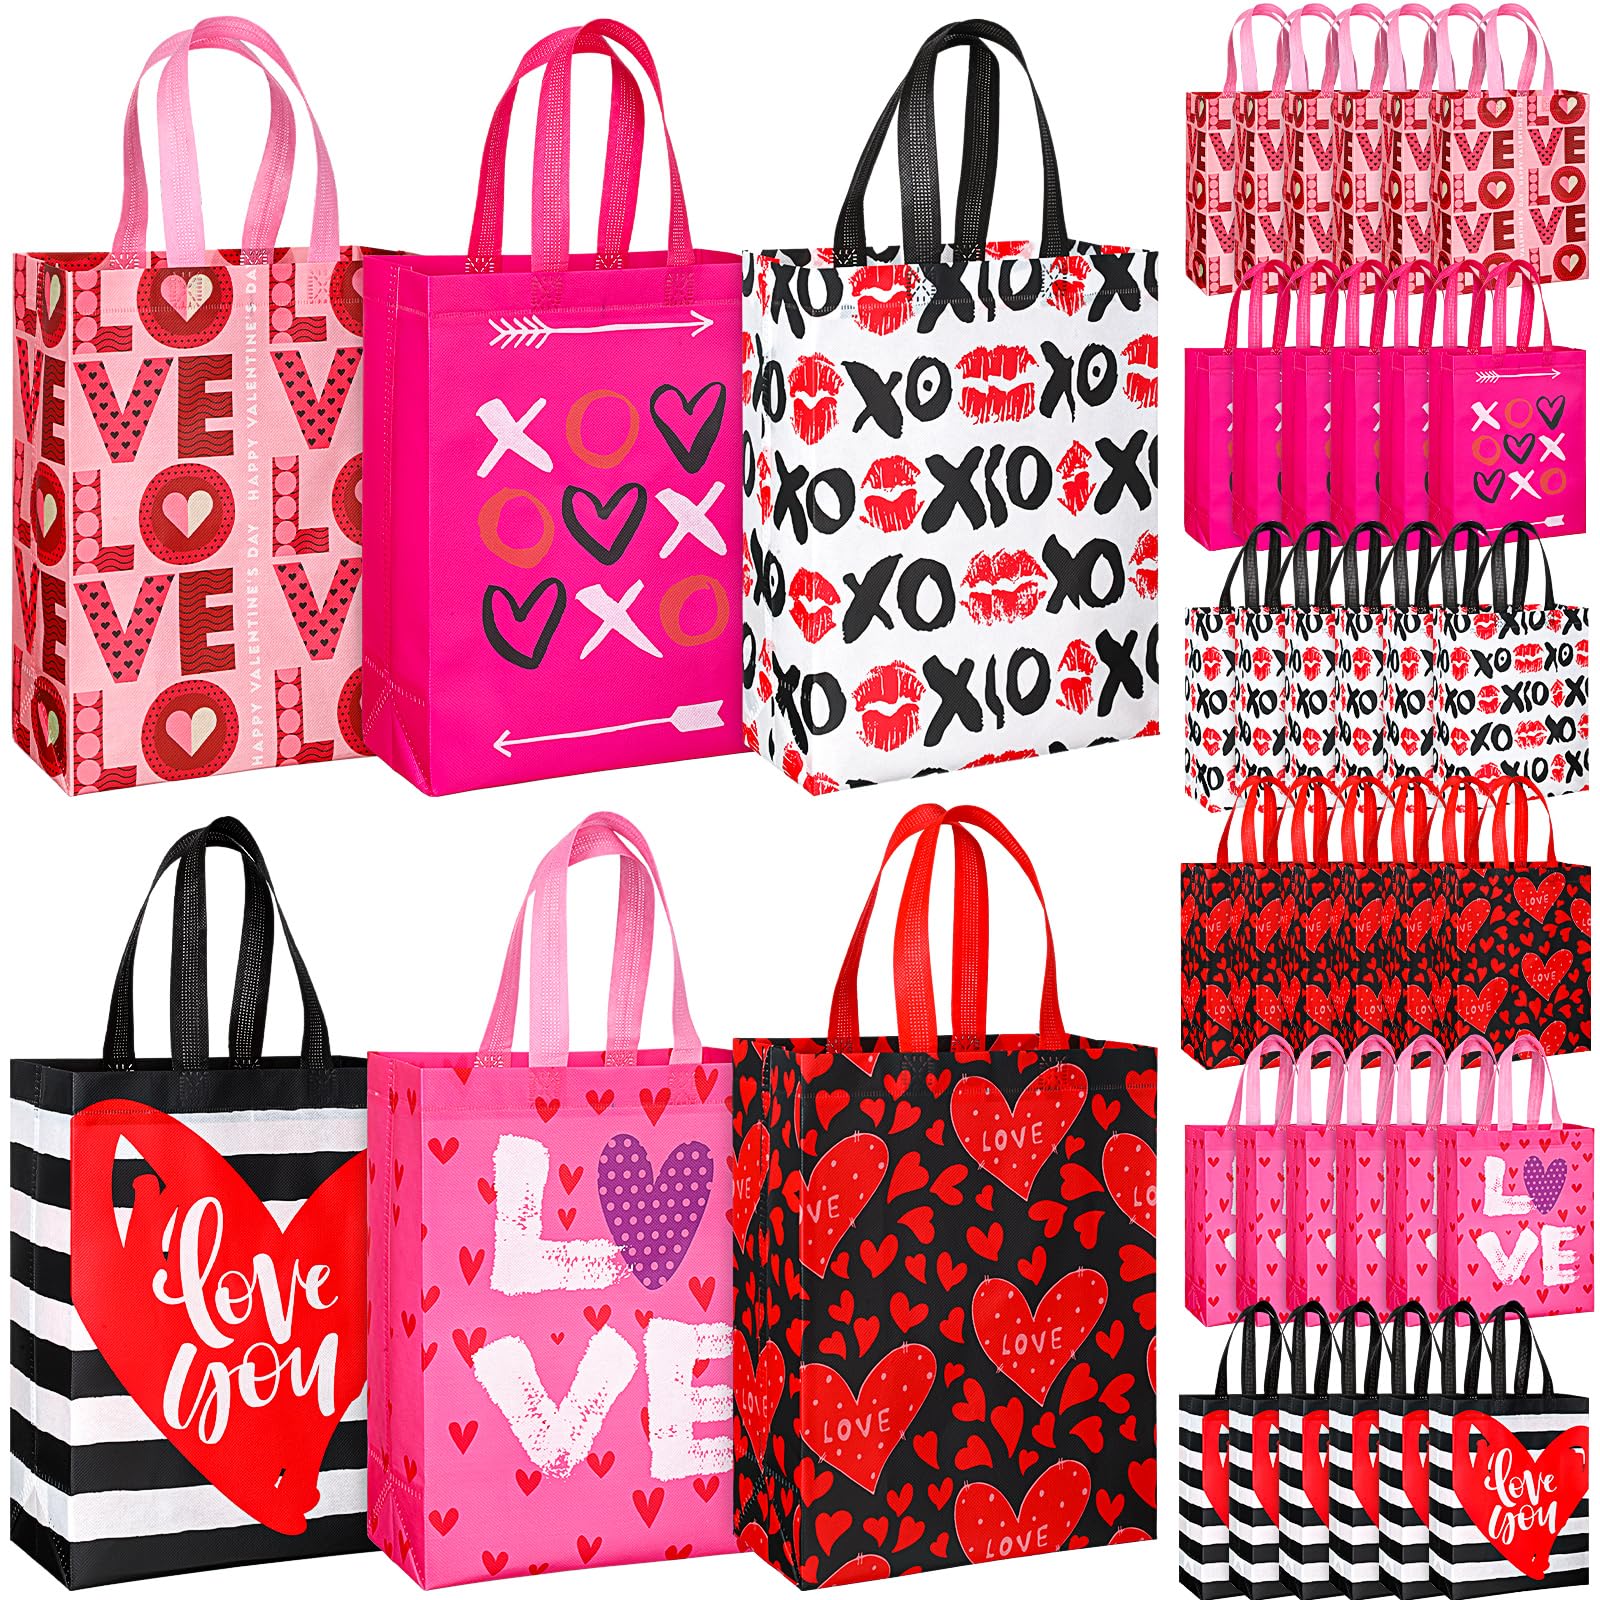 Sweetude Valentine's Day Gift Bags